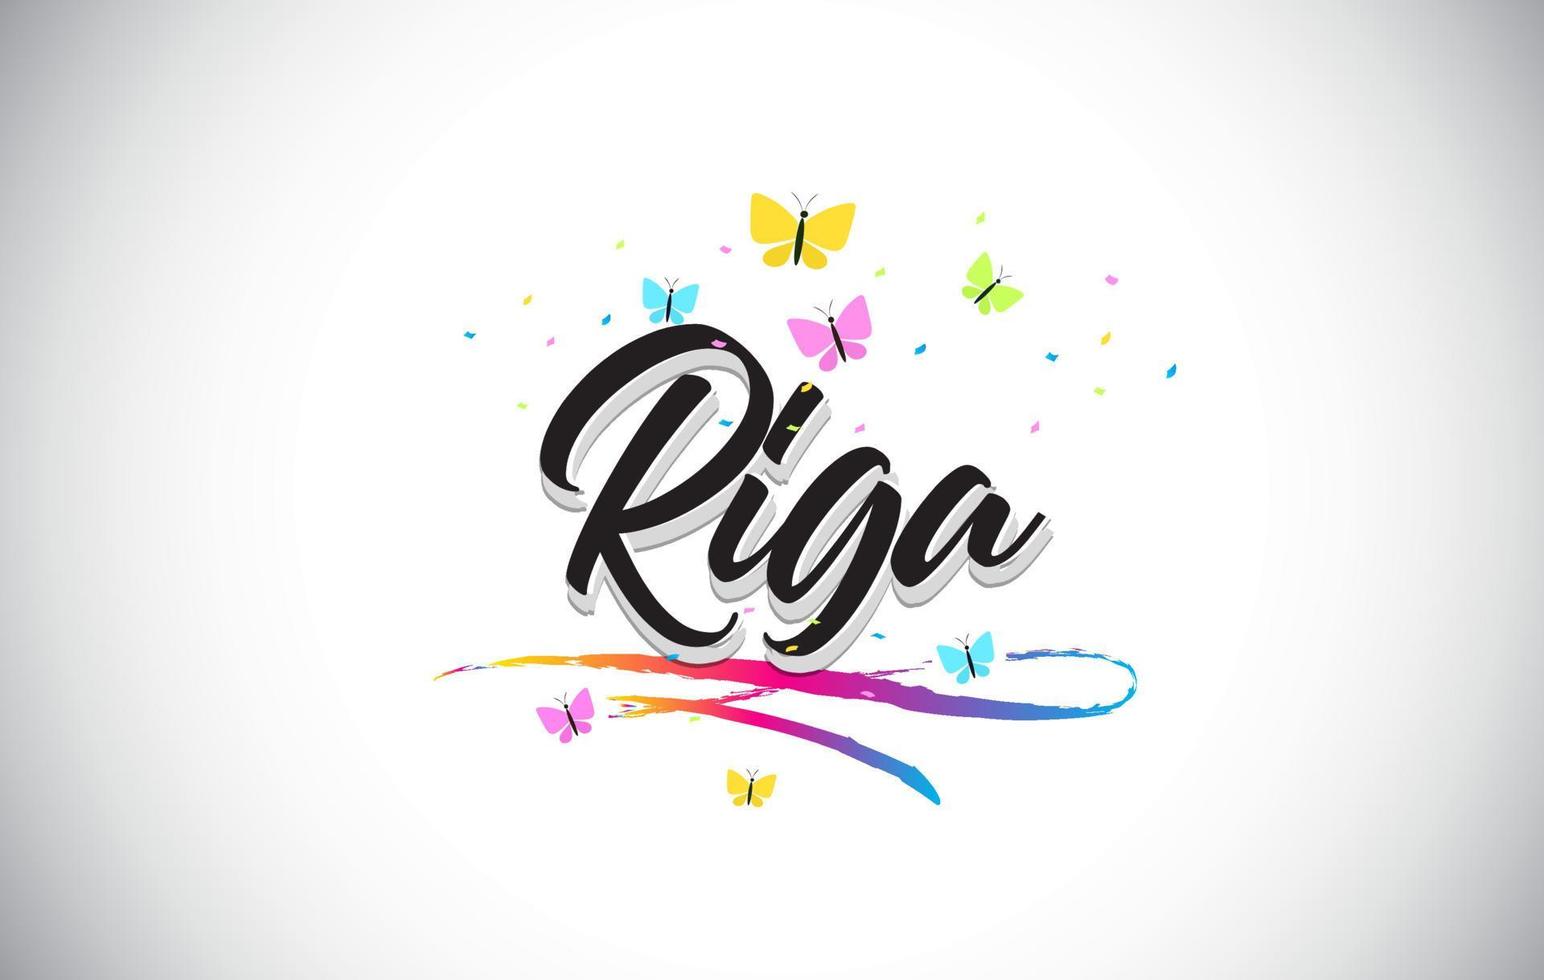 Riga Handwritten Vector Word Text with Butterflies and Colorful Swoosh.